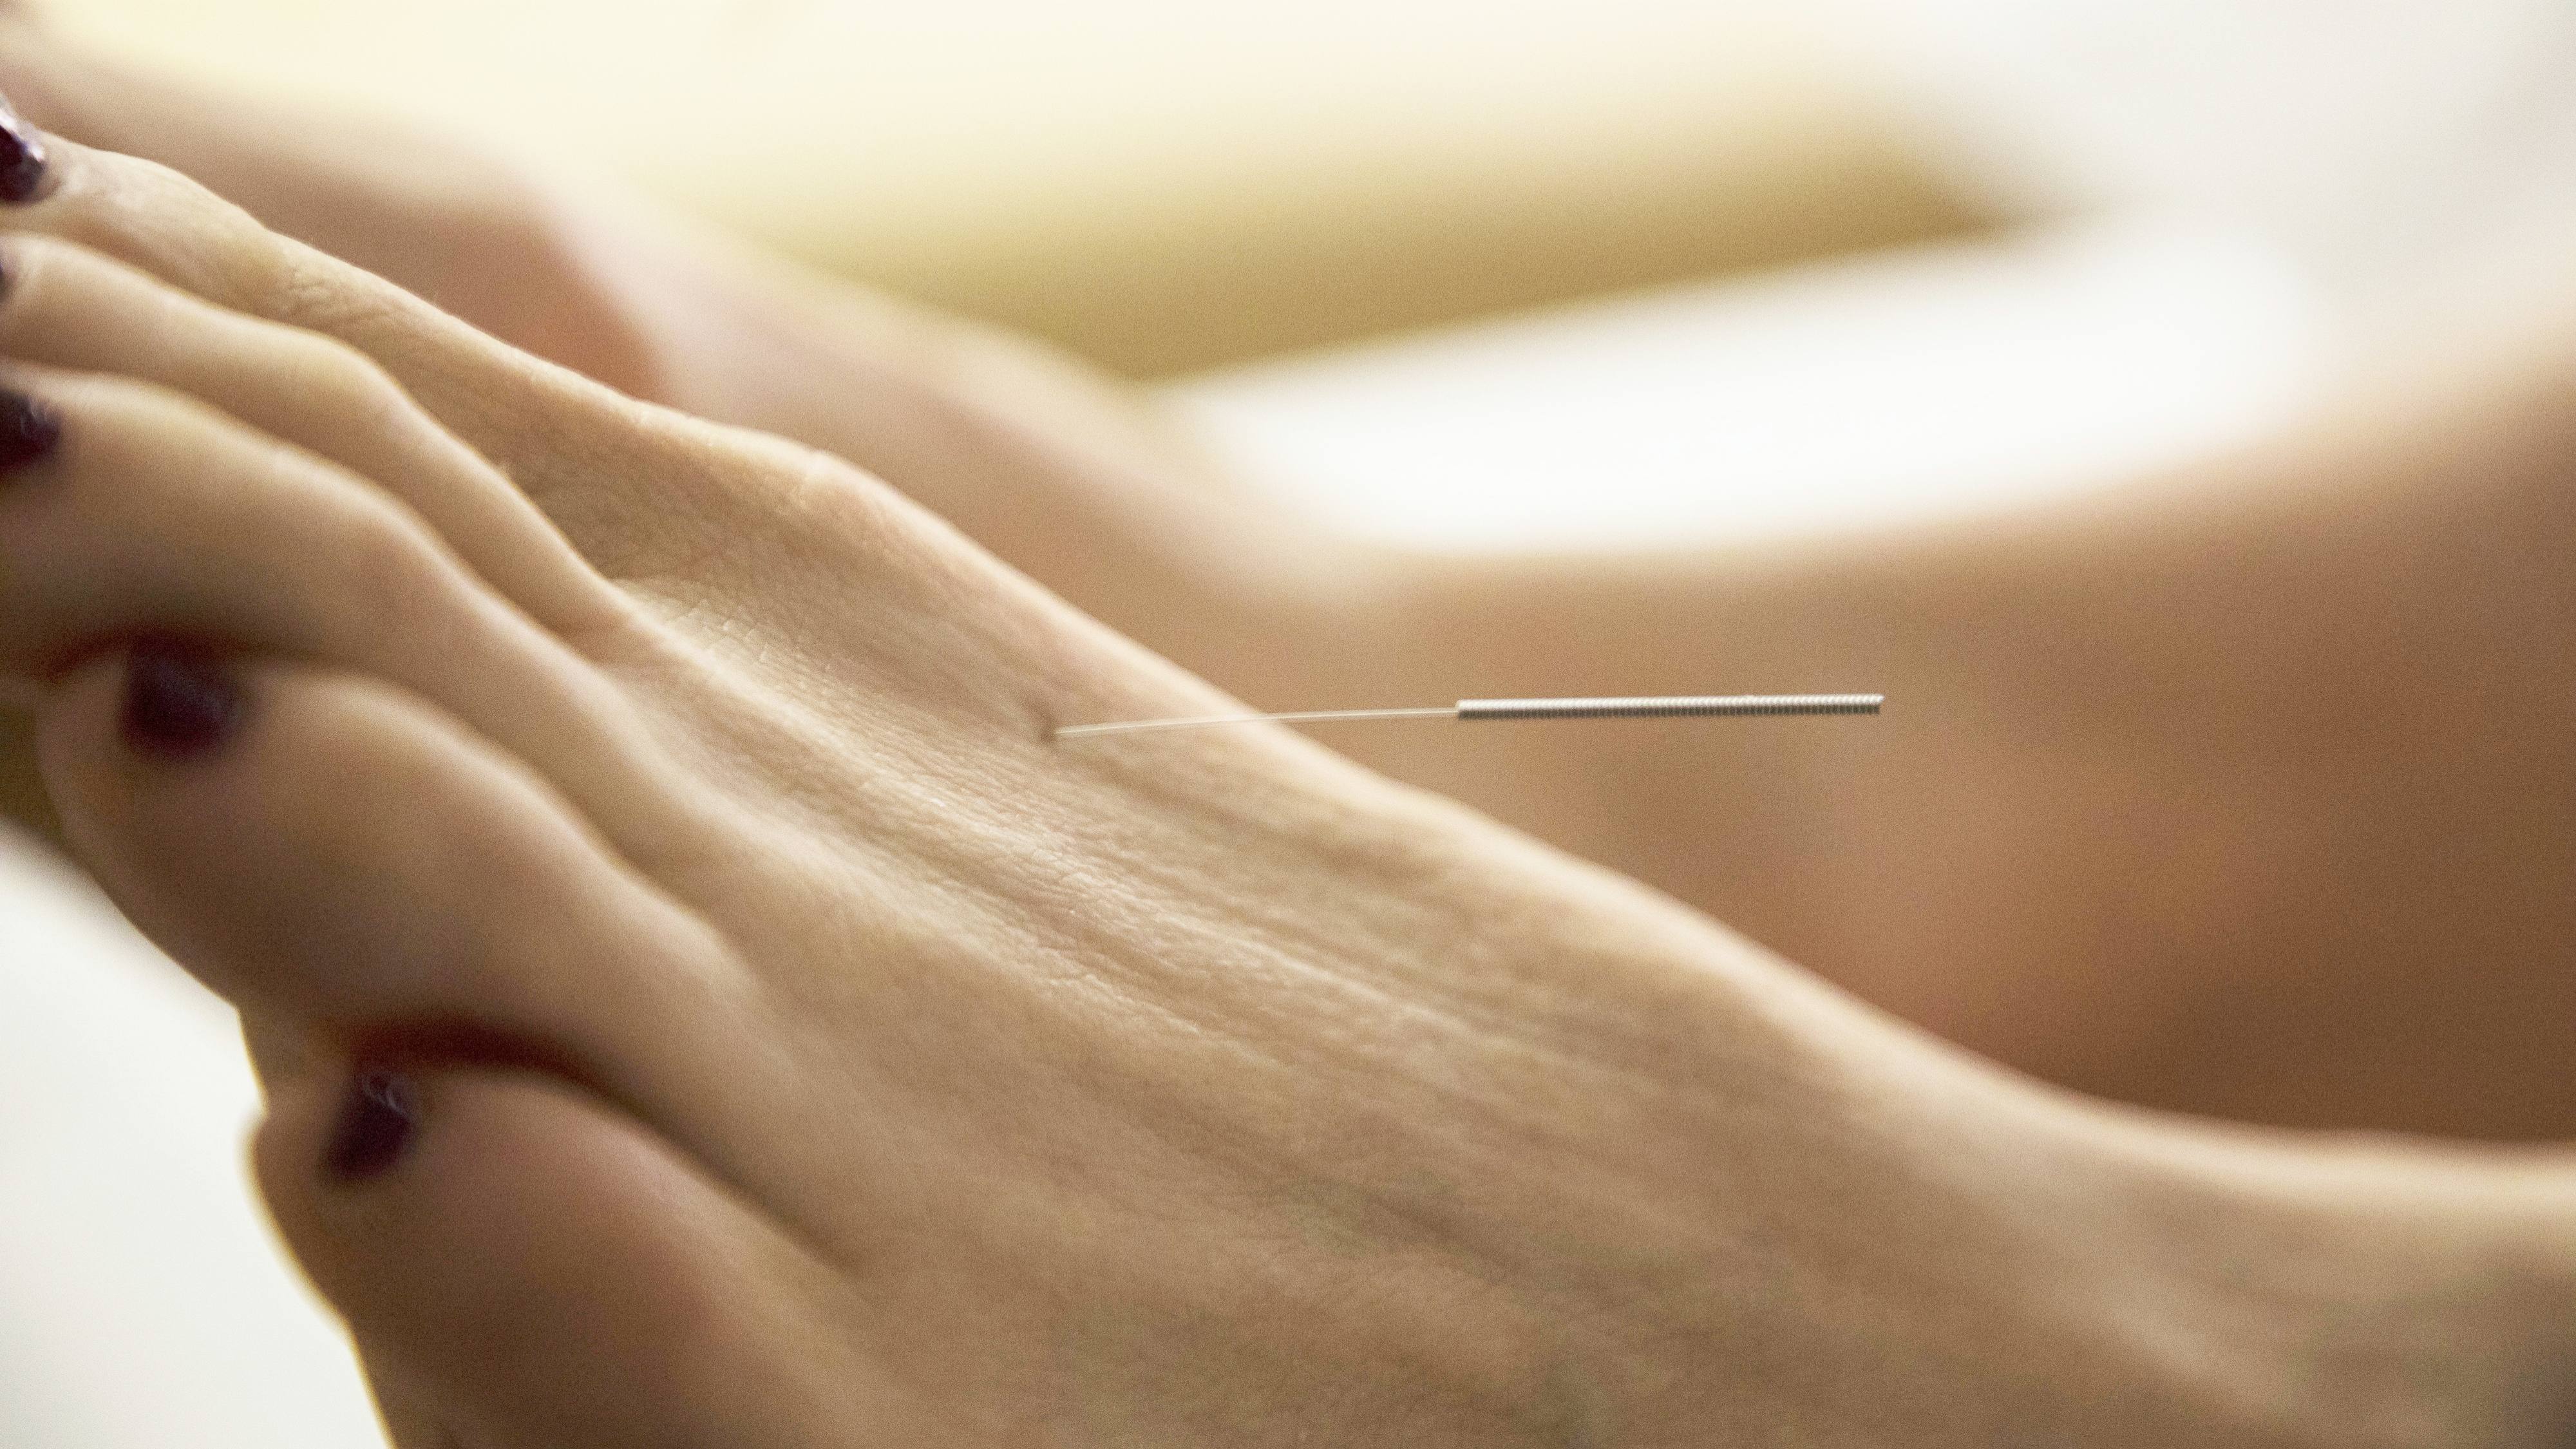 a women's foot with a needle in it during an acupuncture therapy session